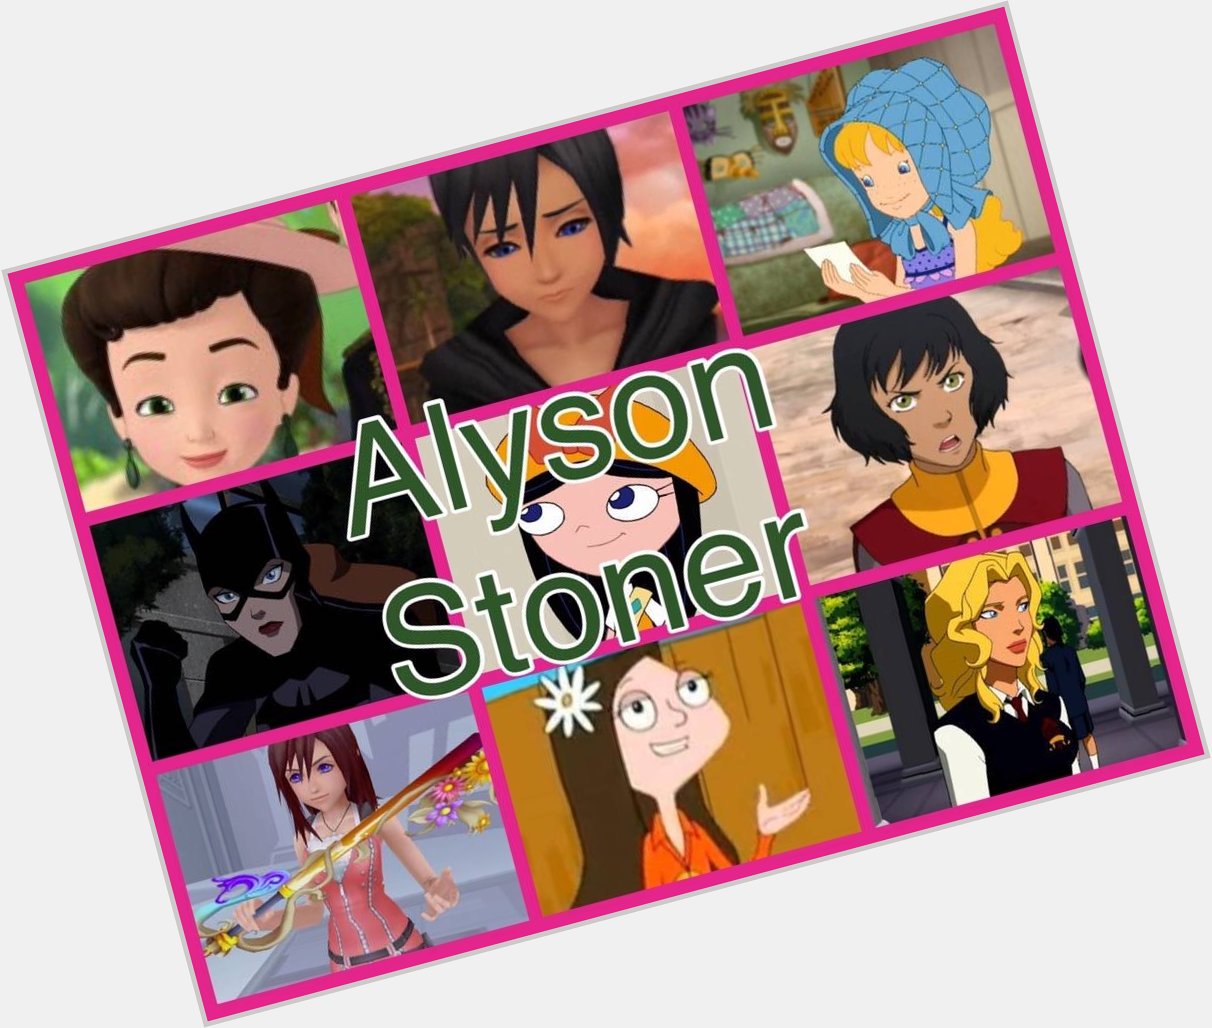   Happy birthday to Alyson stoner and her characters 